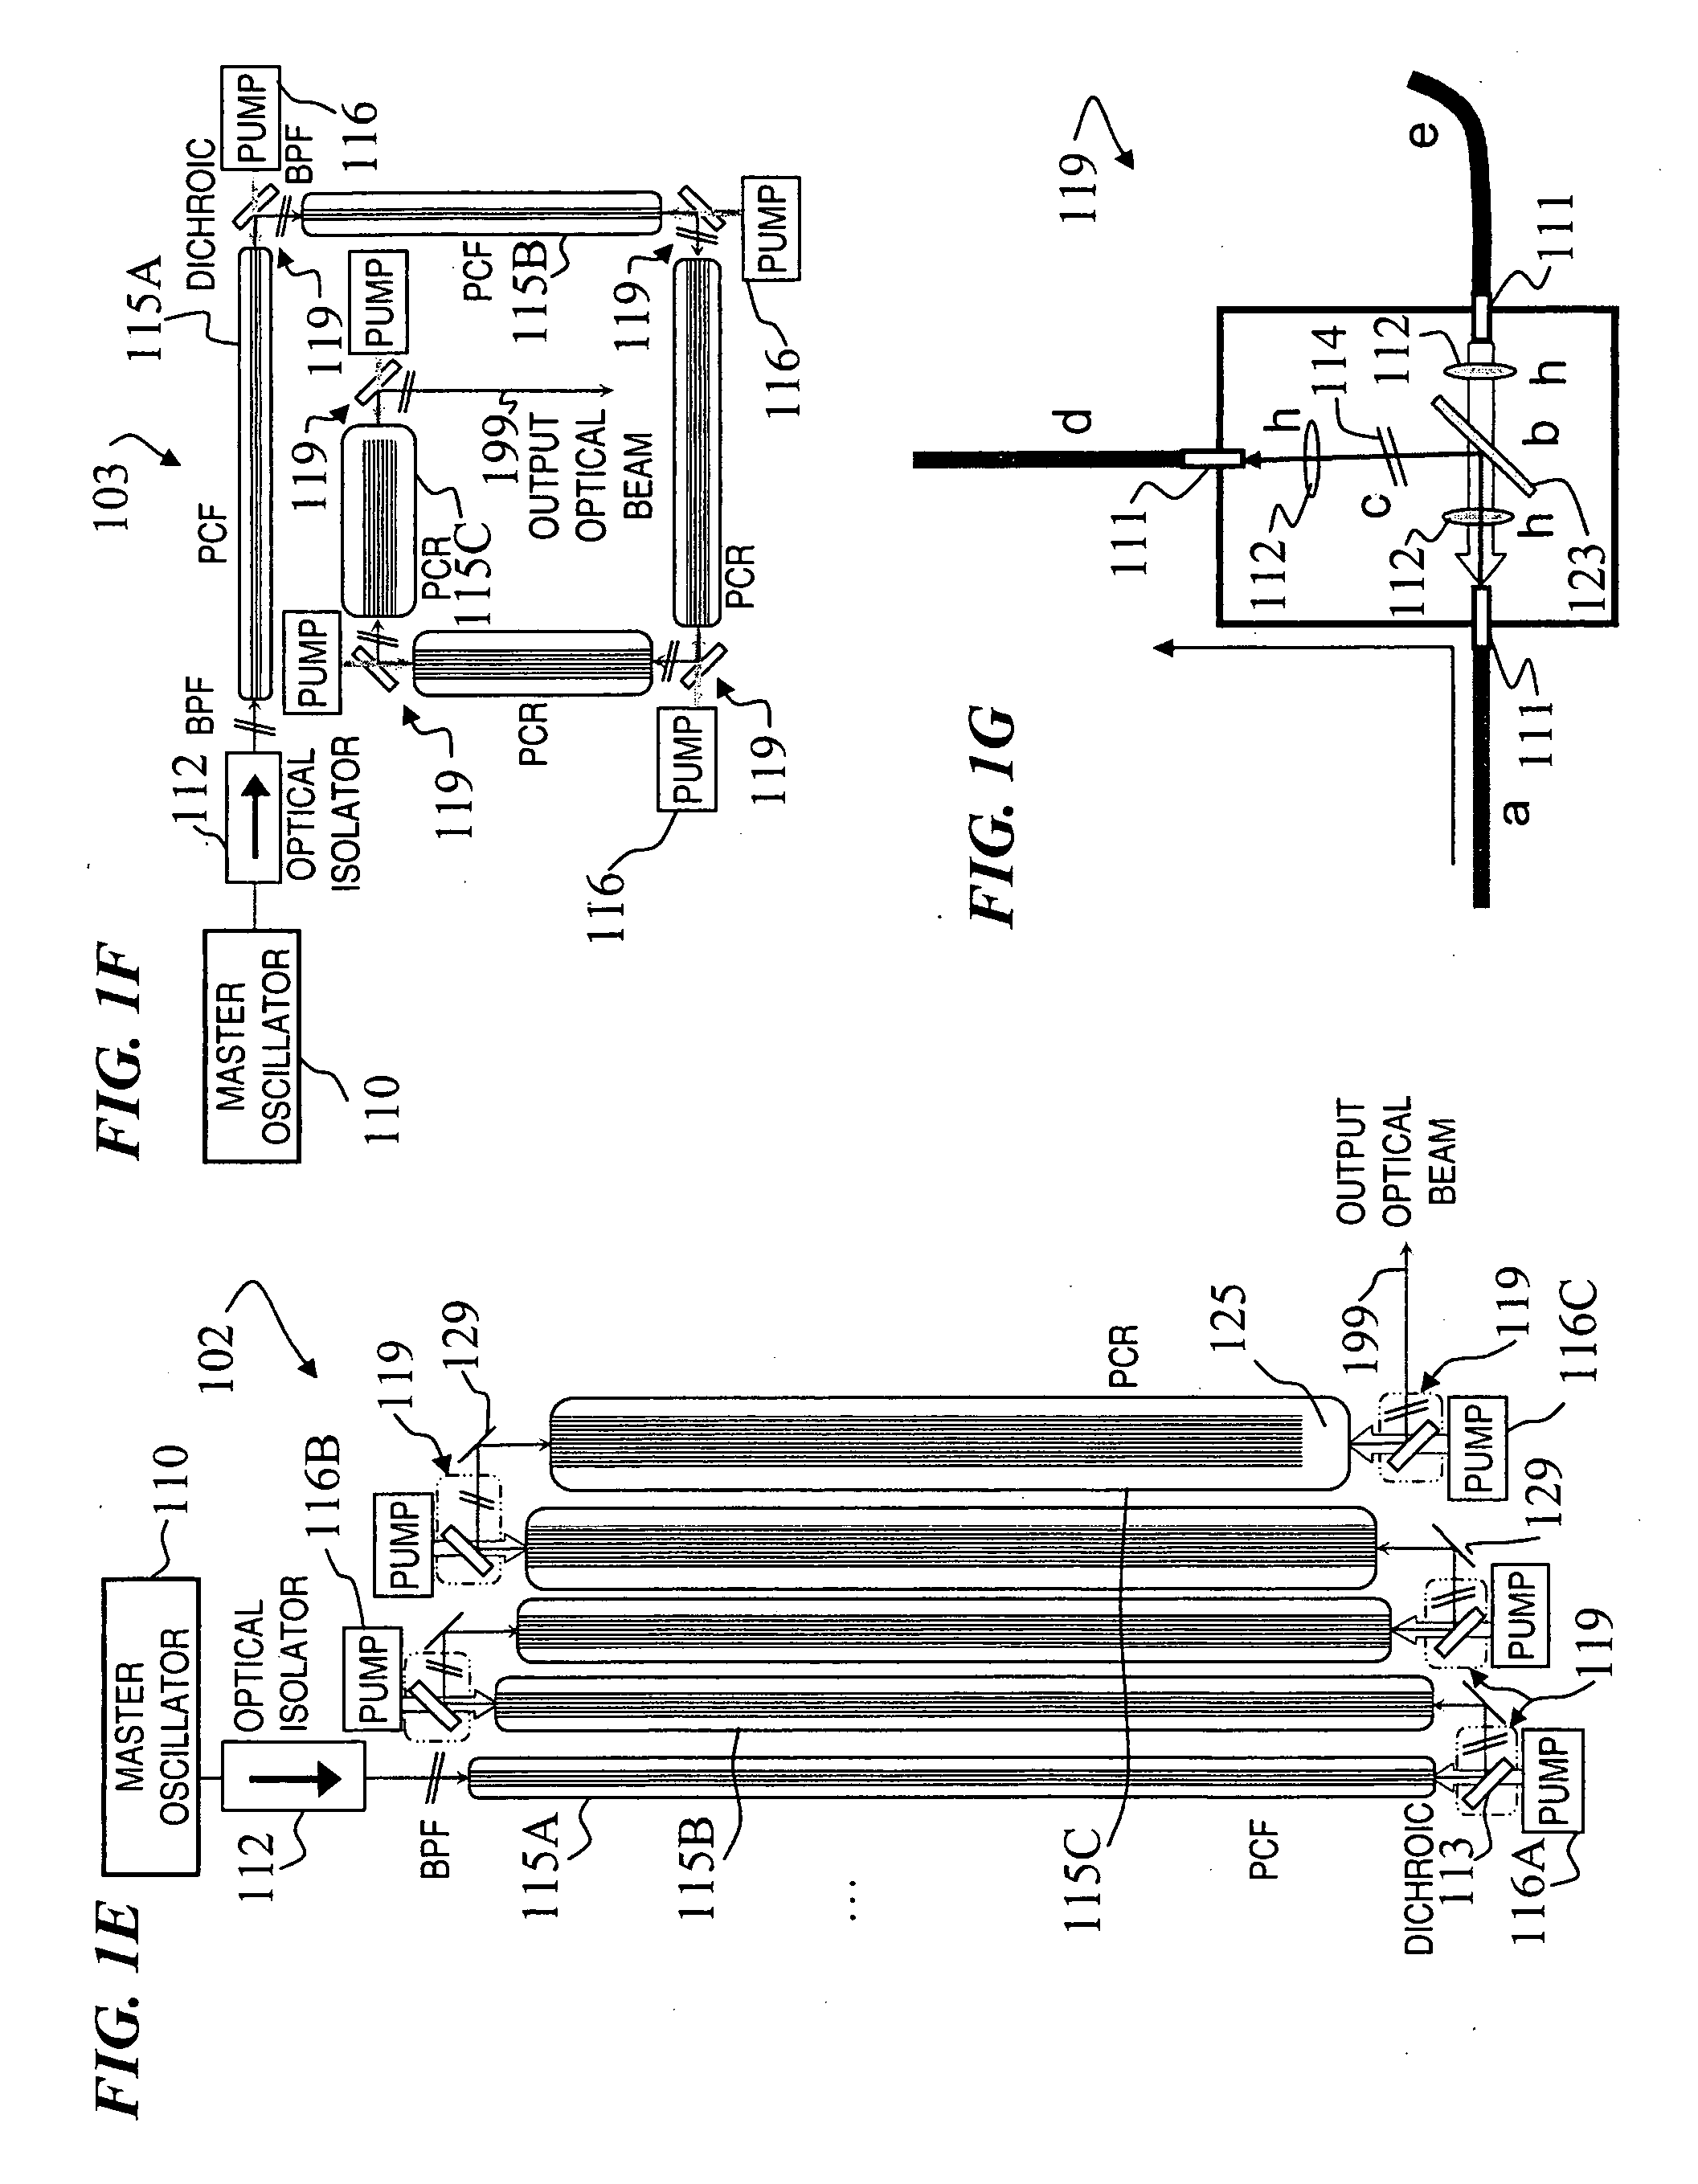 Fiber- or rod-based optical source featuring a large-core, rare-earth-doped photonic-crystal device for generation of high-power pulsed radiation and method